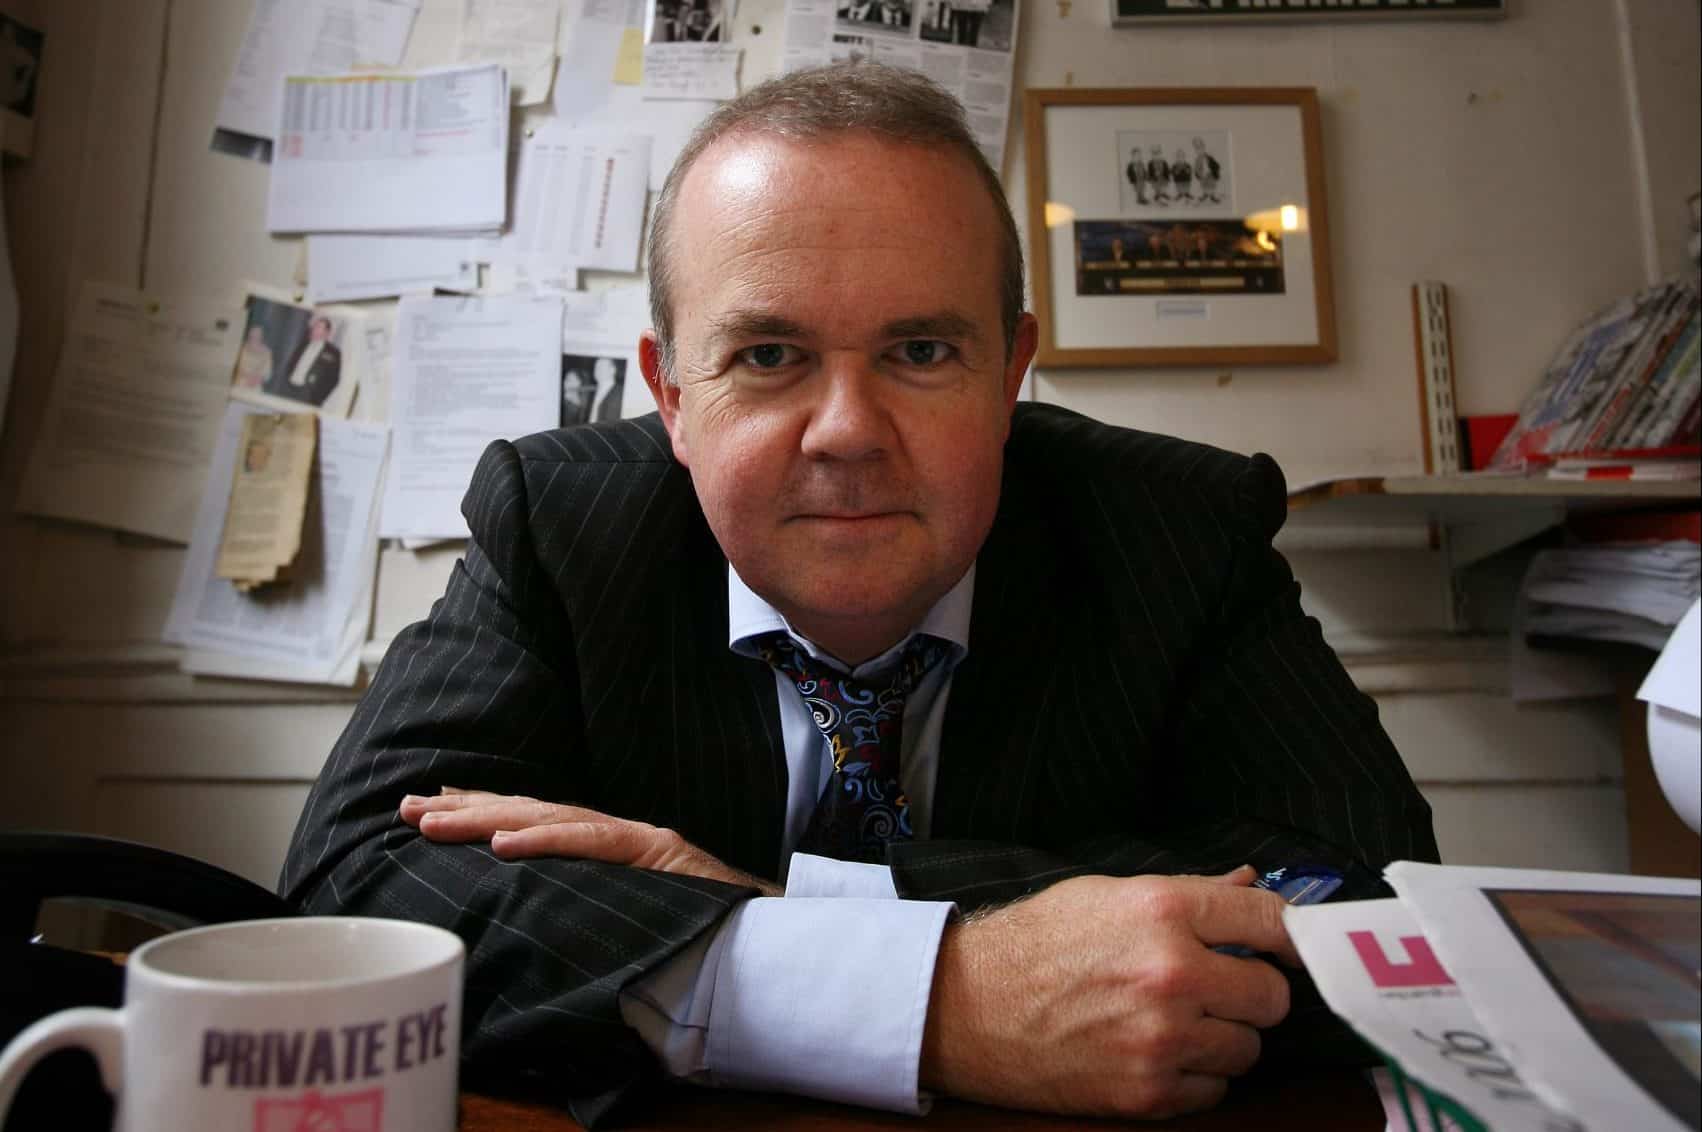 Ian Hislop eviscerates MPs over Owen Paterson, sleaze and second jobs